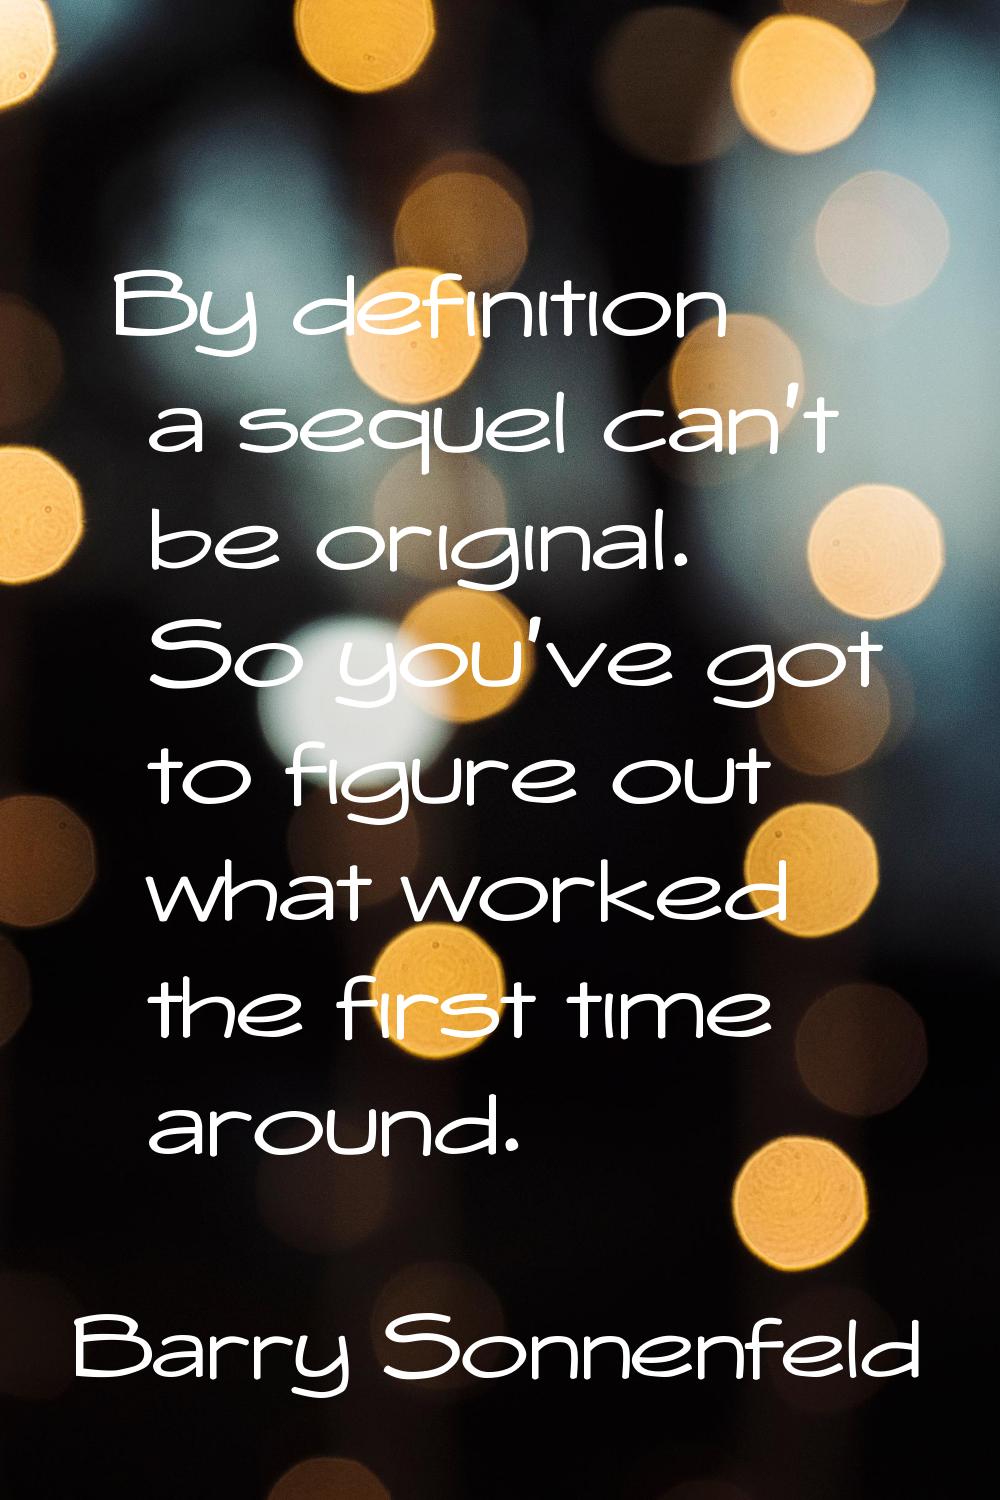 By definition a sequel can't be original. So you've got to figure out what worked the first time ar